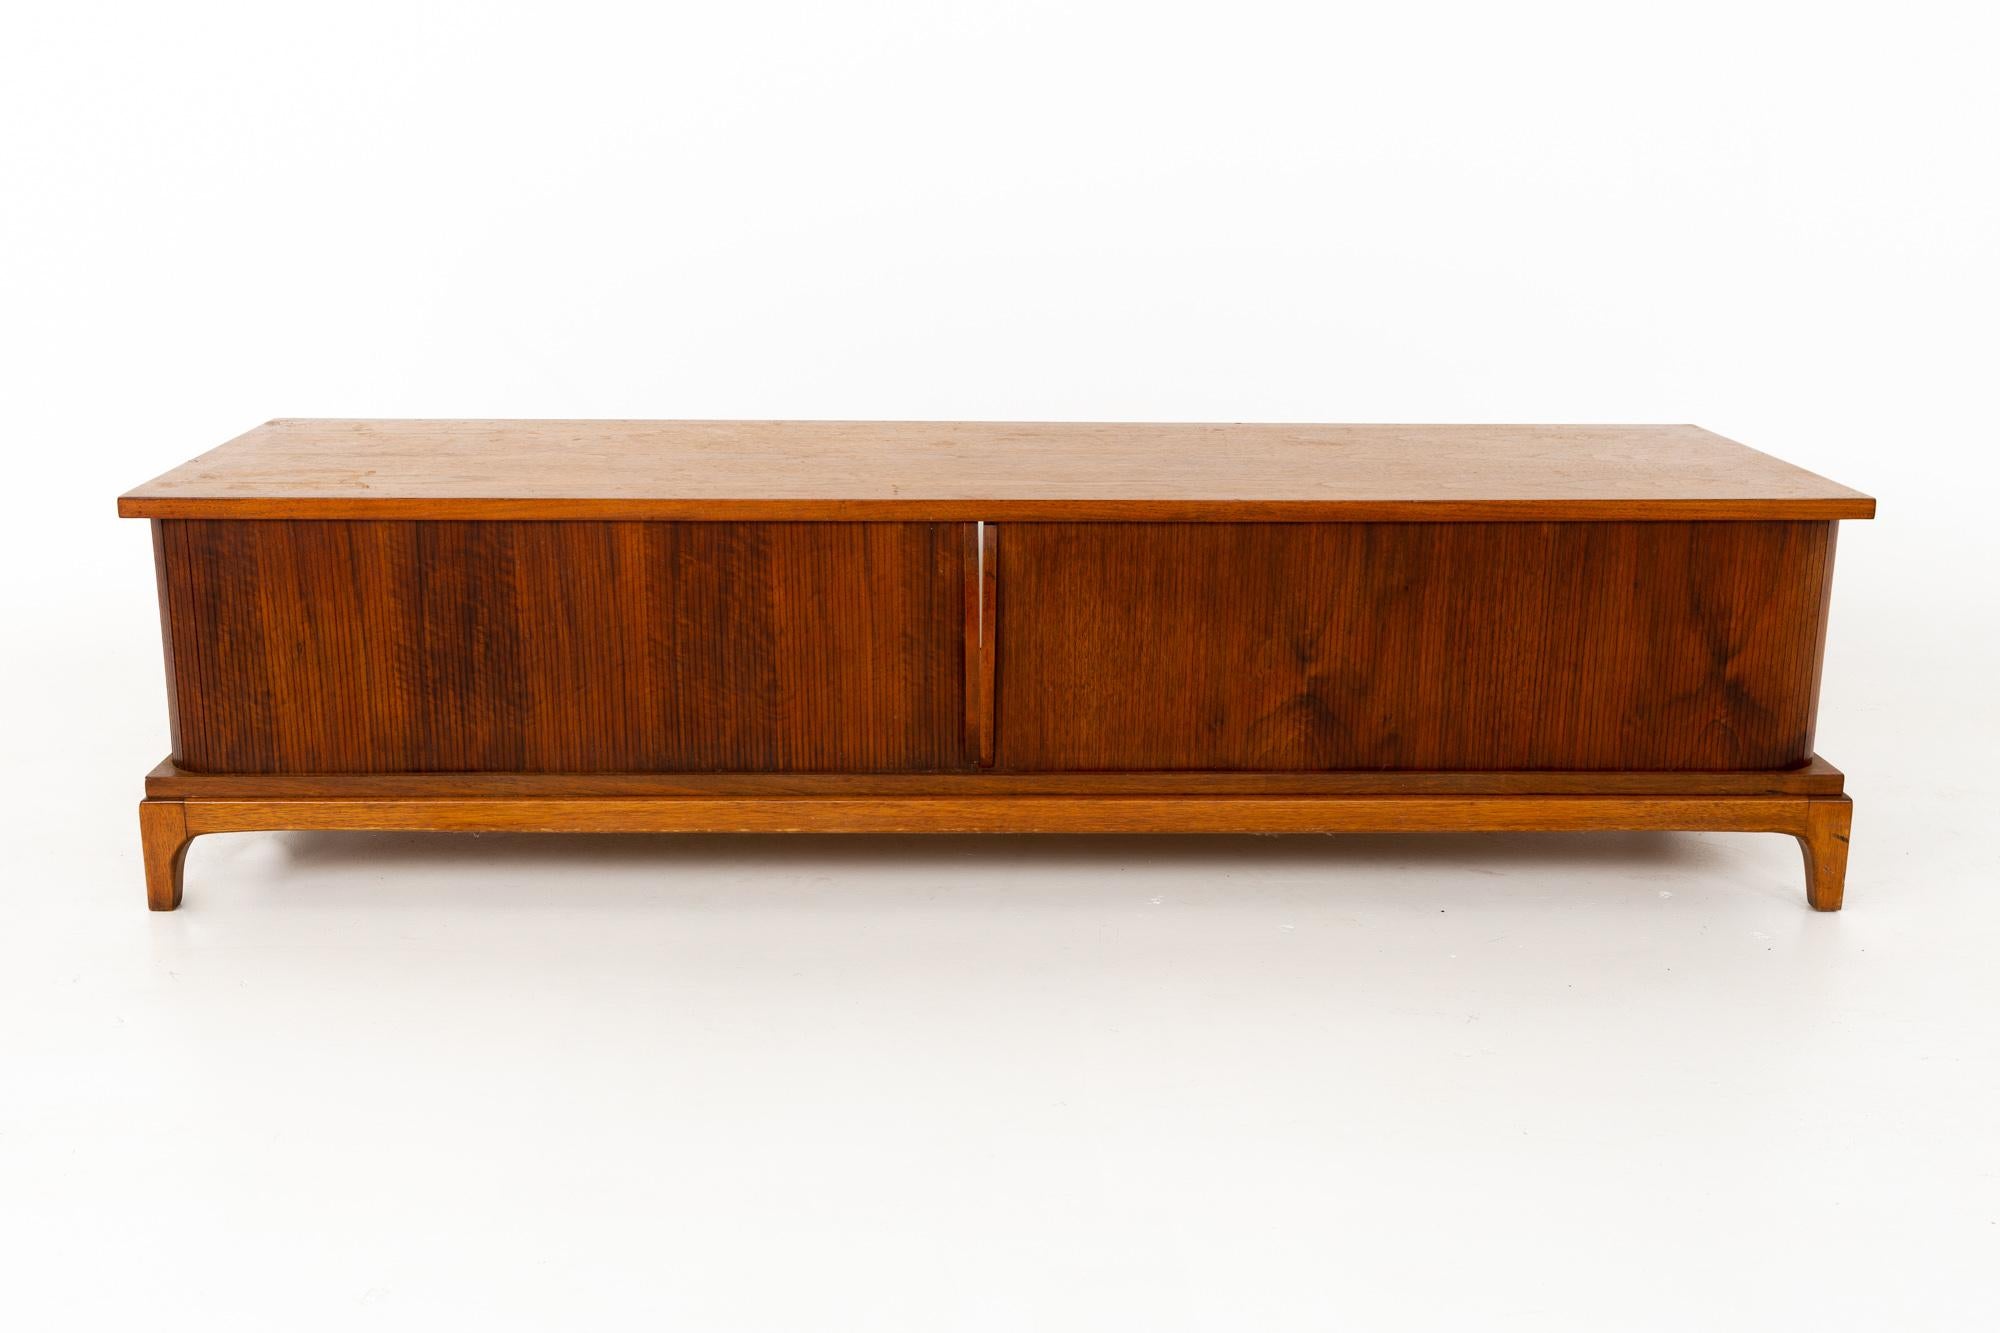 Paul McCobb style Lane rhythm mid century walnut tambour door coffee table

This coffee table is 64.75 wide x 19.25 deep x 16 inches high

All pieces of furniture can be had in what we call restored vintage condition. That means the piece is